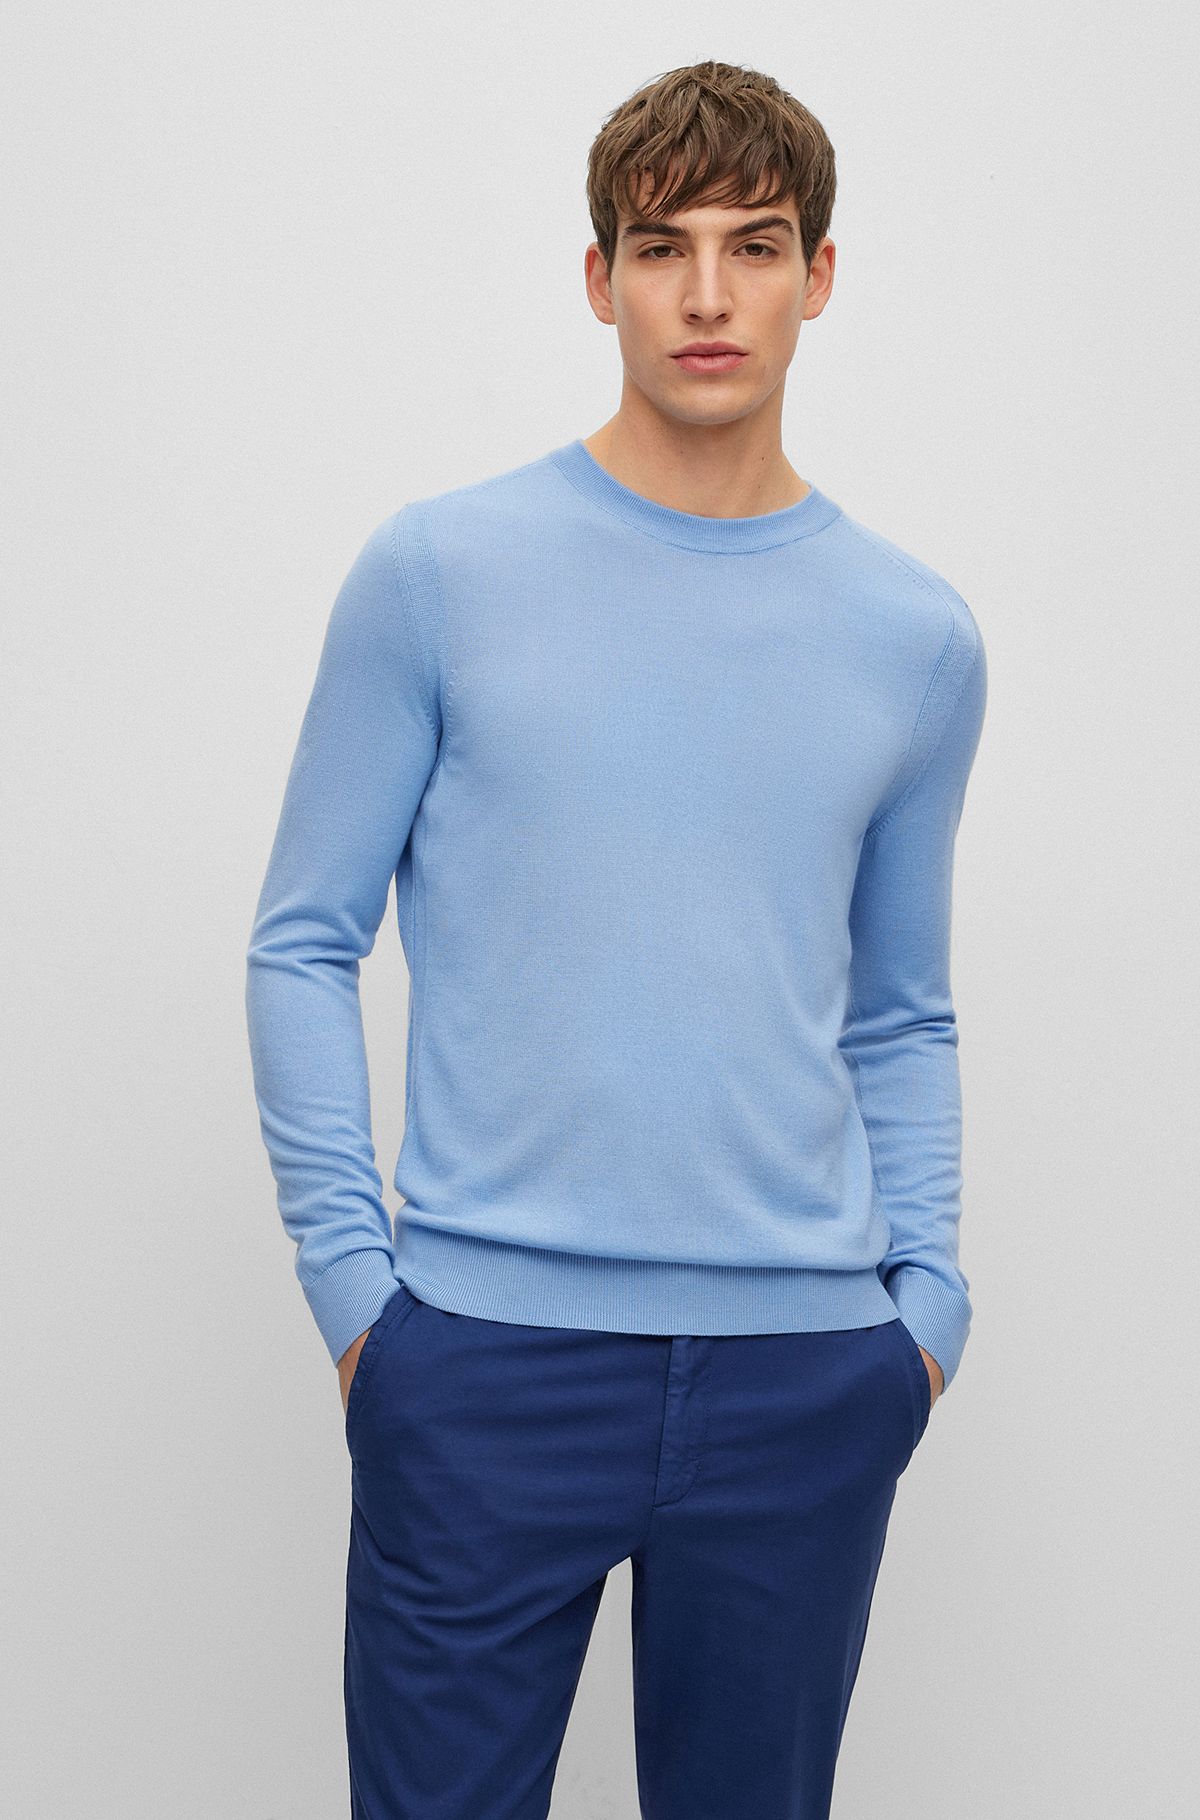 Regular-fit sweater in wool, silk and cashmere, Light Blue